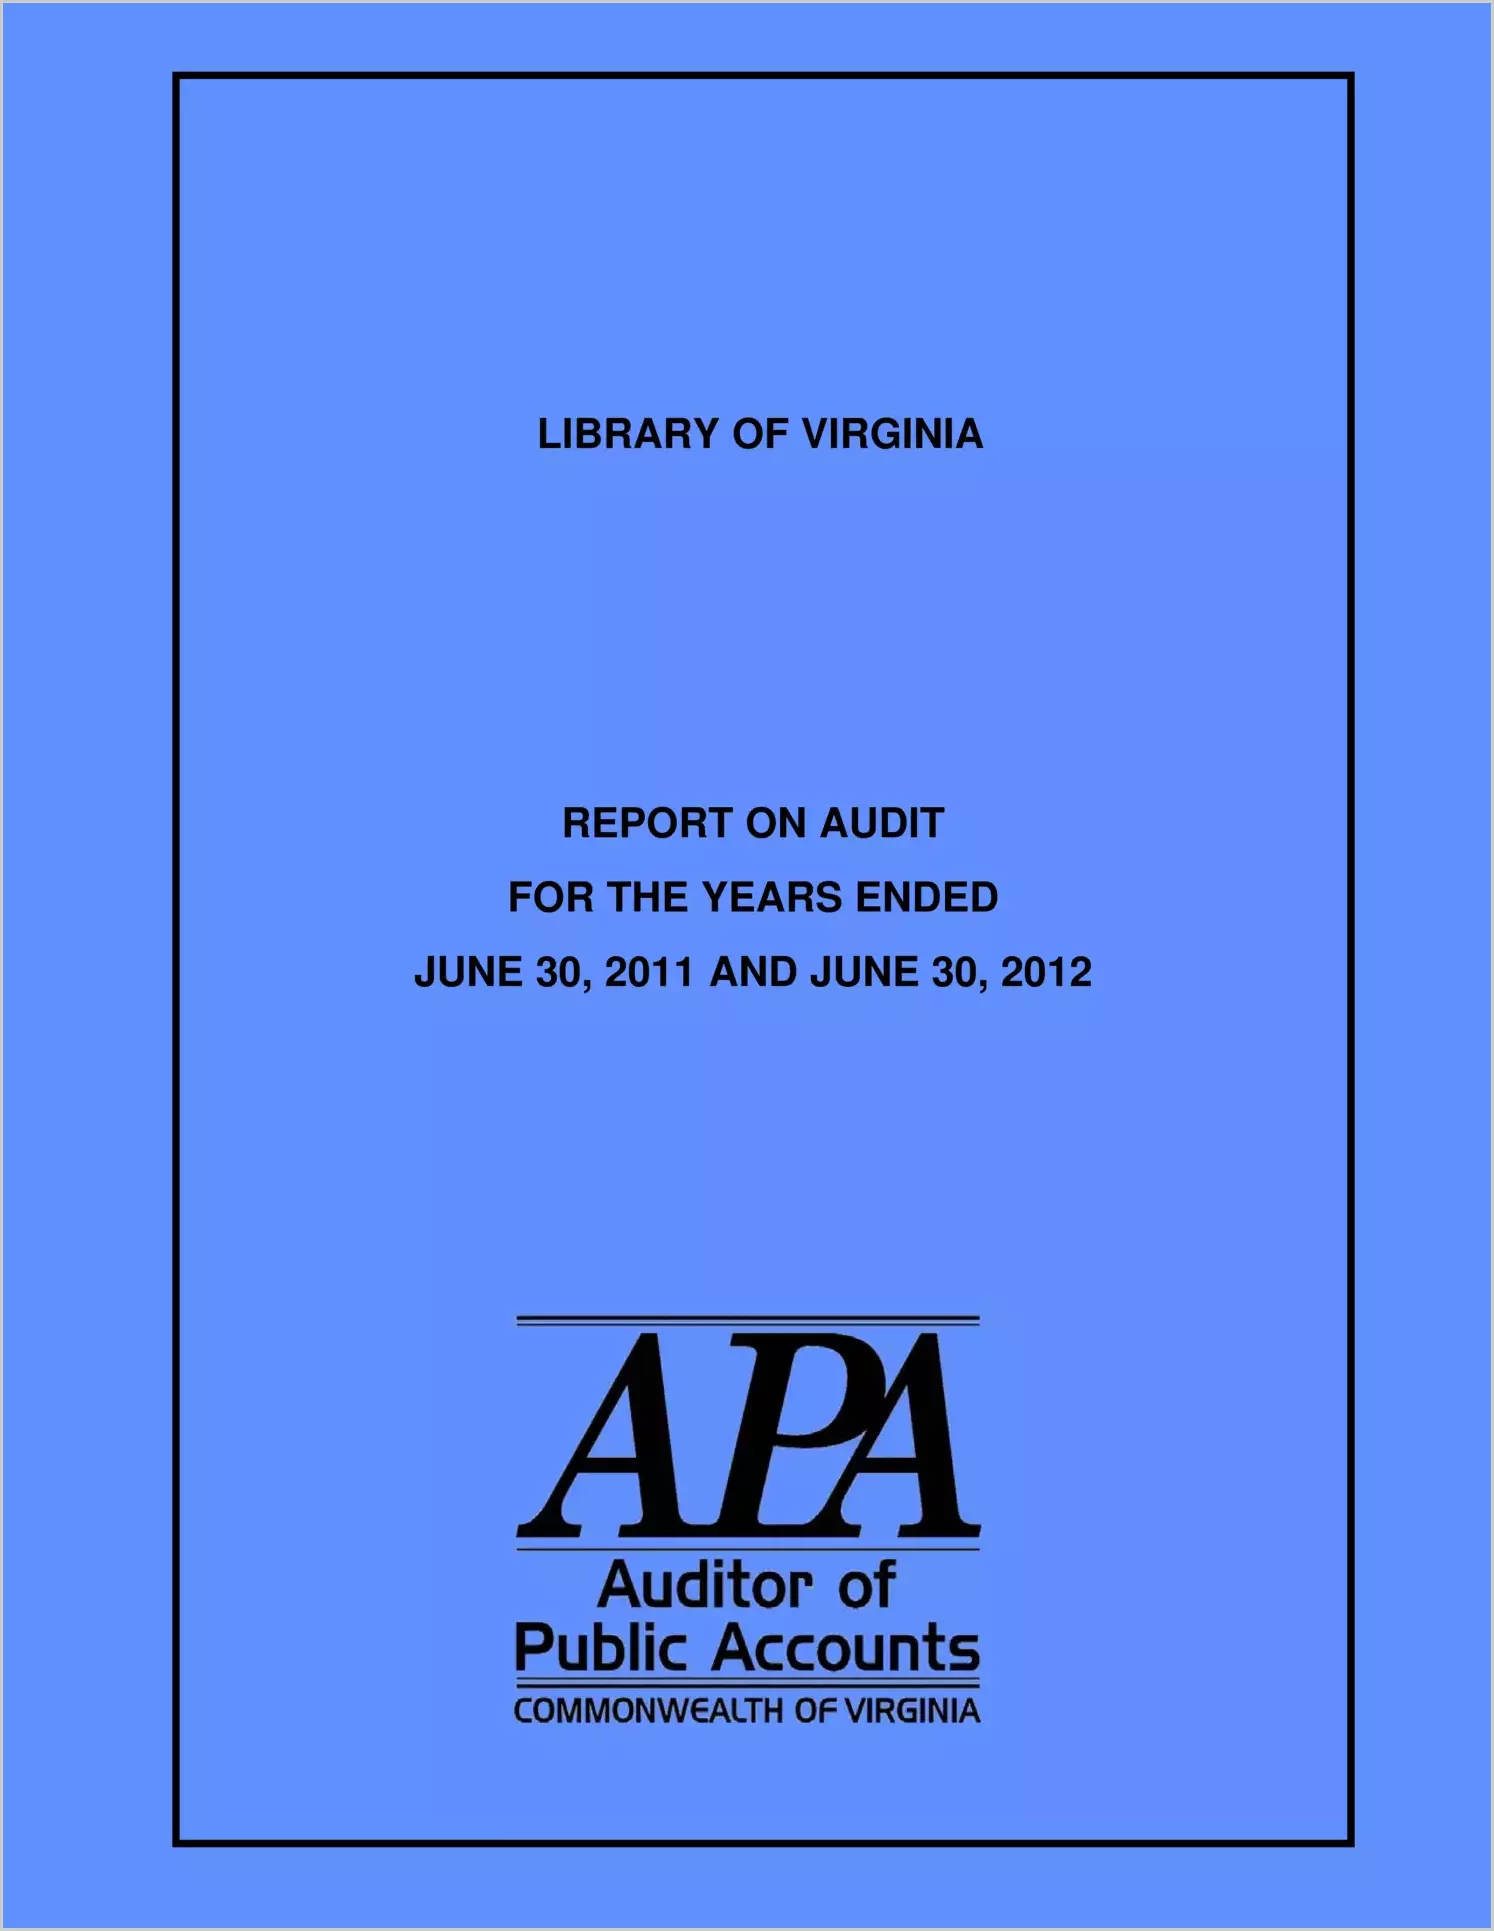 The Library of Virginia Report on Audit for the Fiscal Years Ended June 30, 2011 and June 30, 2012